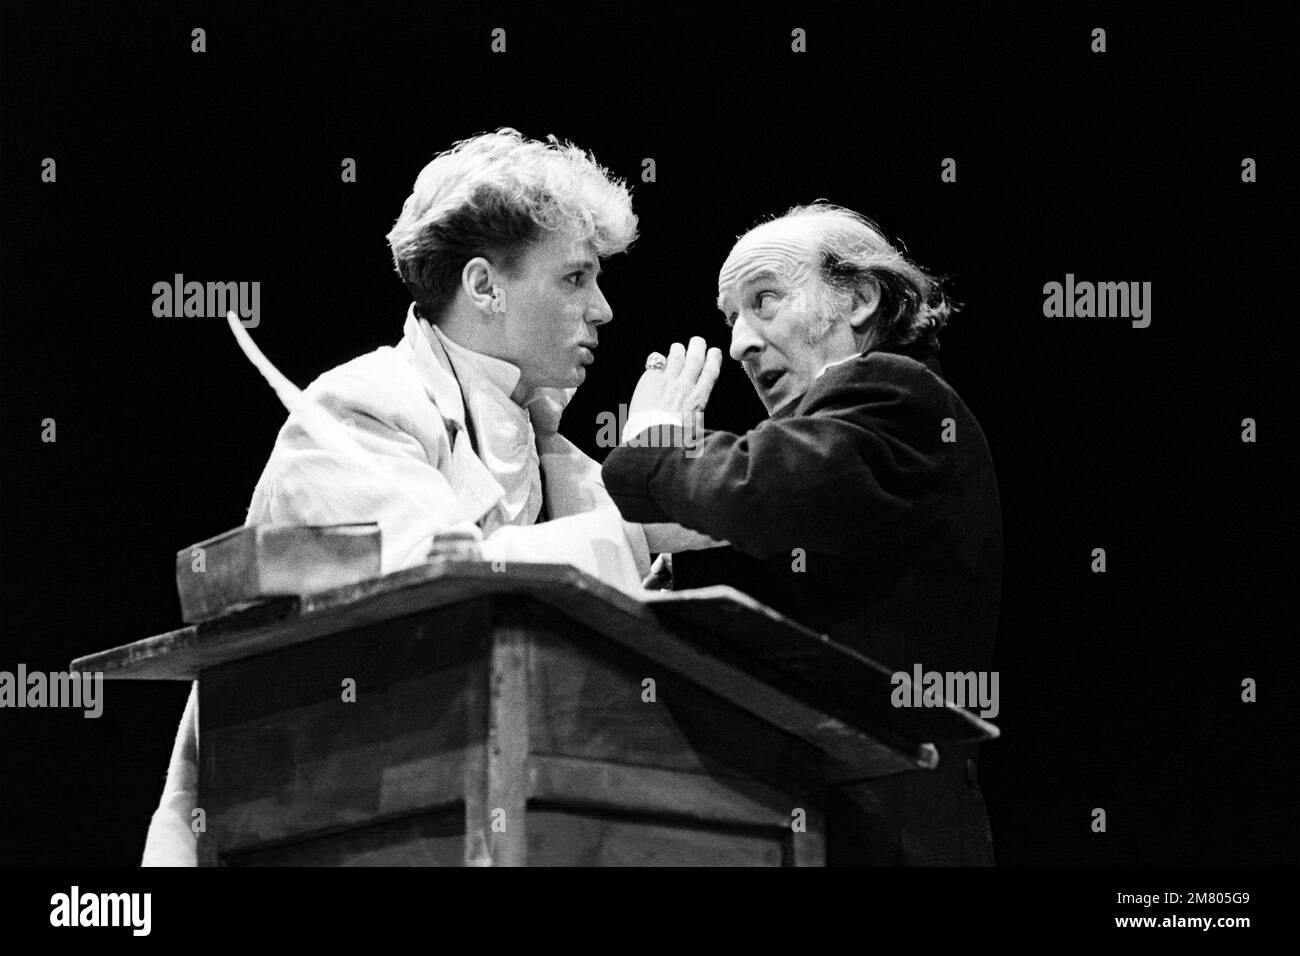 l-r: Ian McCurrach (Pip), Charles Lewsen (Wemmick) in GREAT EXPECTATIONS by Charles Dickens at The Old Vic, London SE1  02/01/1985  adapted & directed by Peter Coe  design: Peter Rice  lighting: Mark Henderson Stock Photo